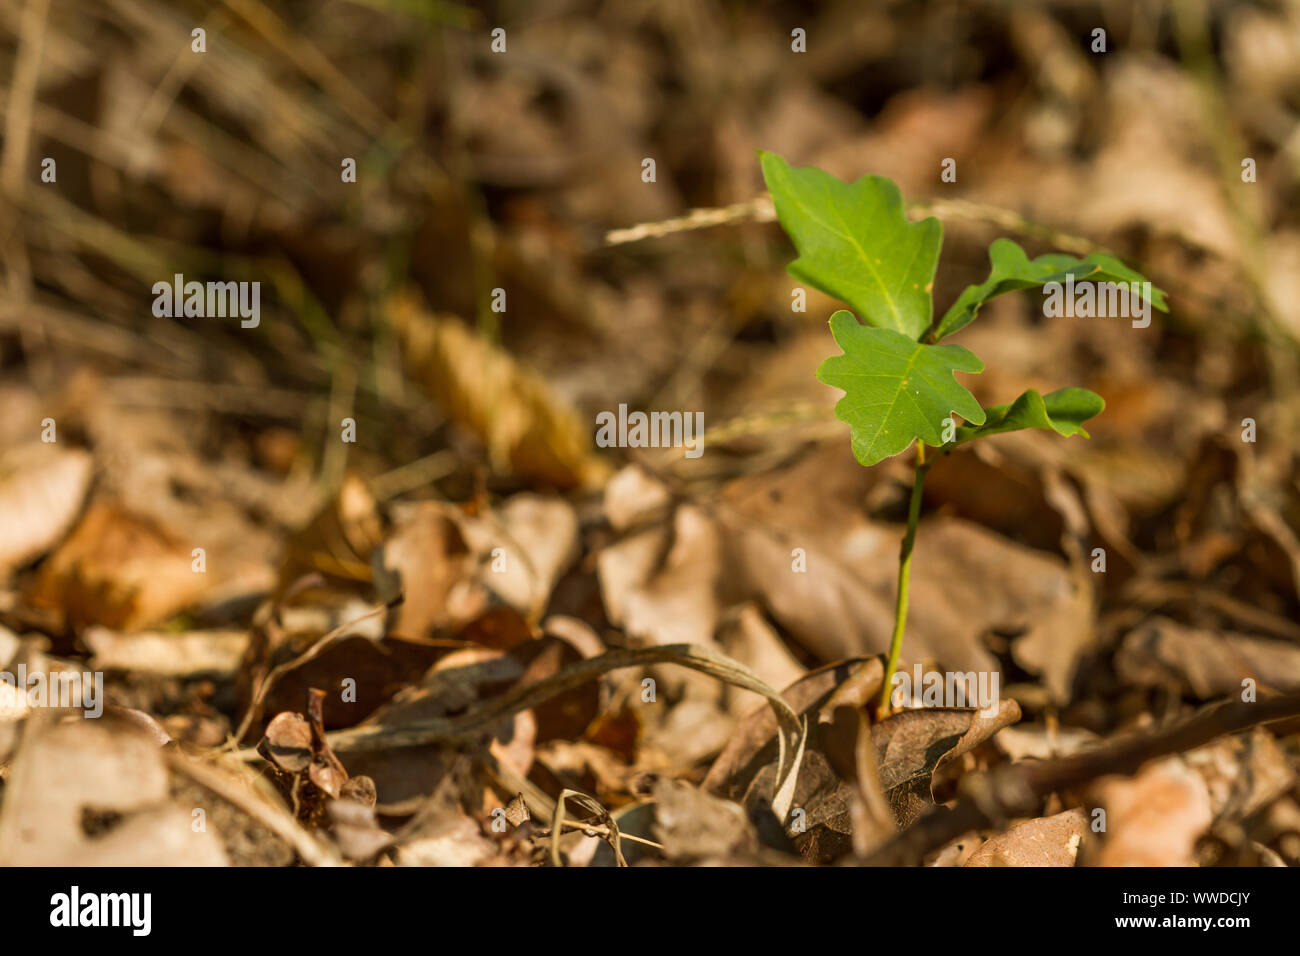 One-year old seedling of sessile oak starting life in a mixed forest in Germany Stock Photo